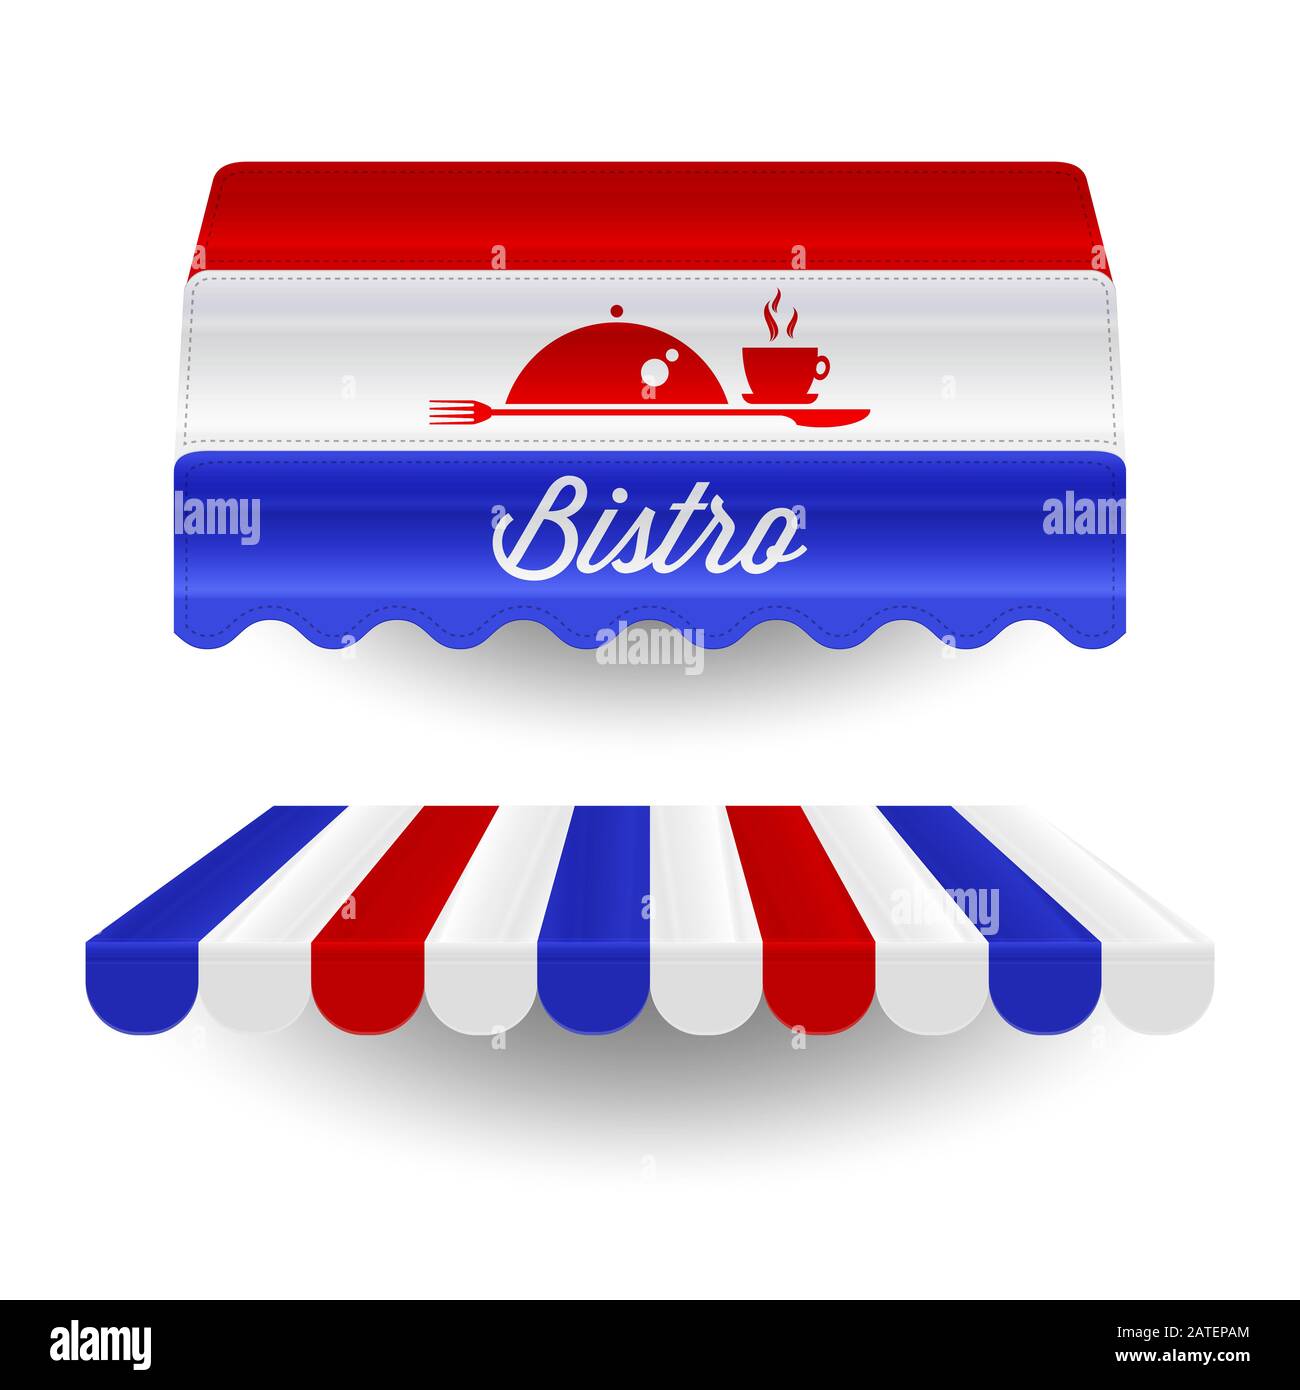 French bistro awnings in colors of the french flag. illustration. Bistro facade design element. Detailed realistic awnings for cafe, shop or restauran Stock Photo